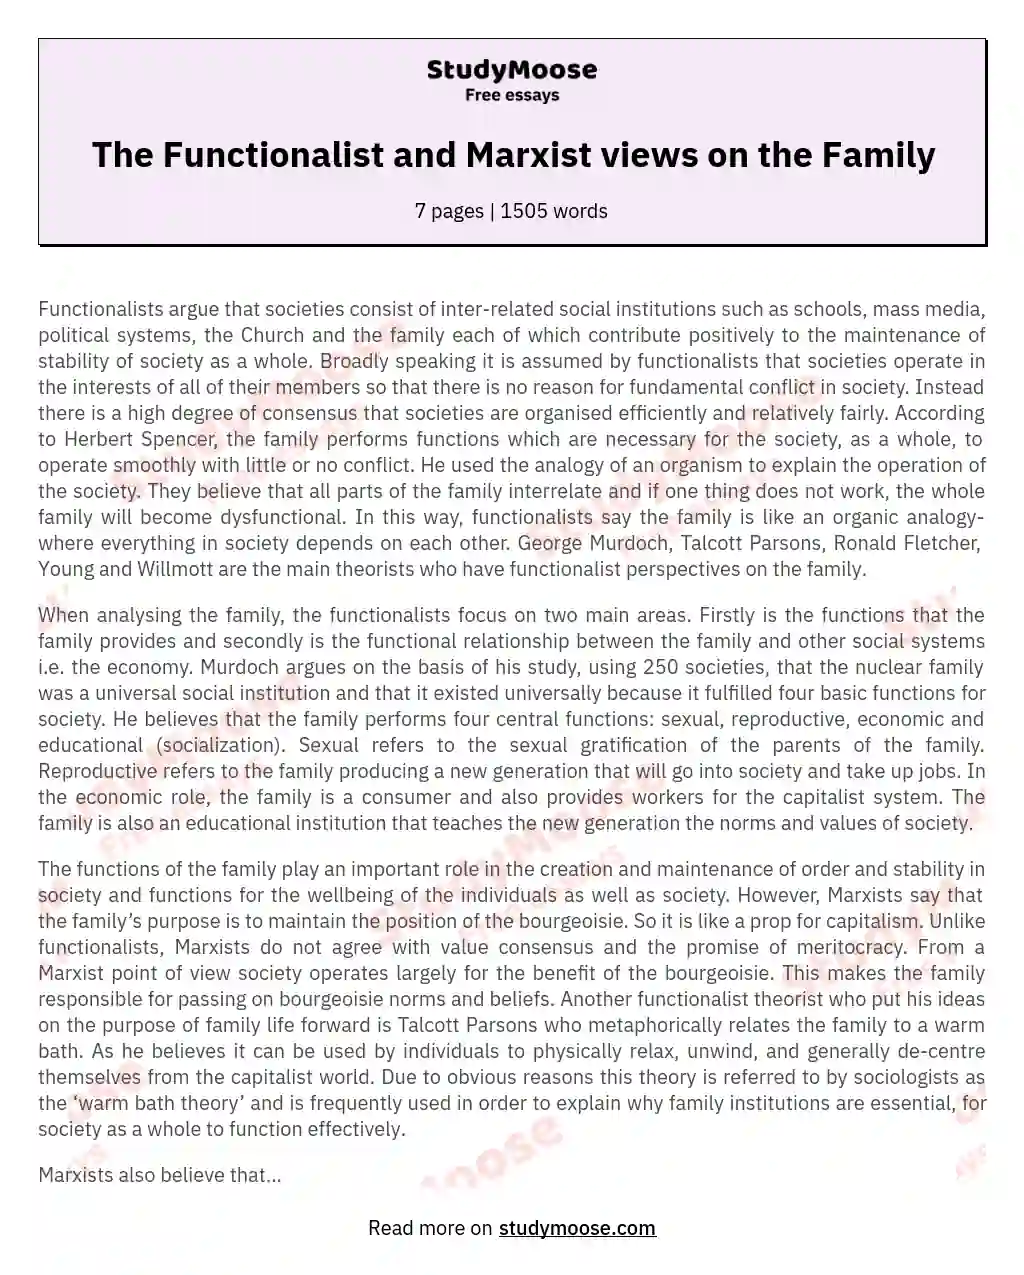 The Functionalist and Marxist views on the Family essay